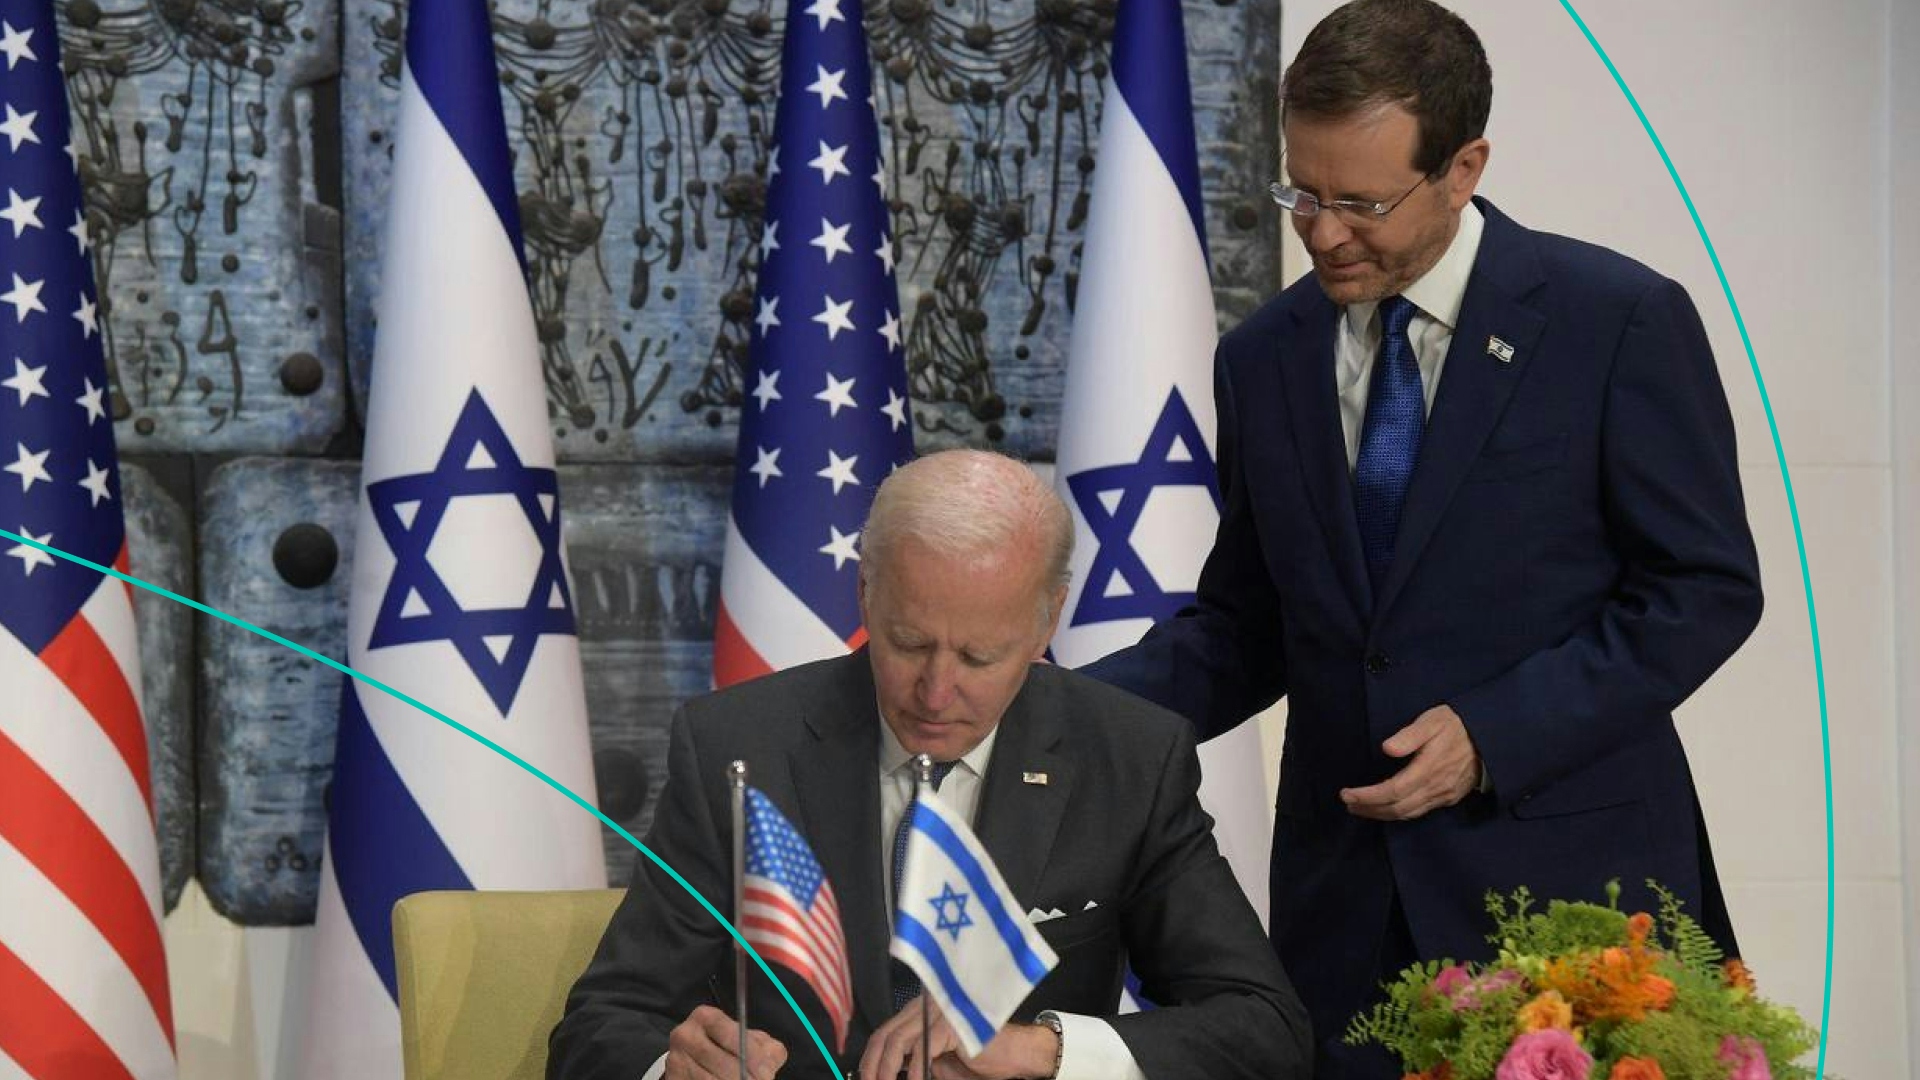 US President Joe Biden (L) signs the guestbook before talks with Israel's President Isaac Herzog (R)